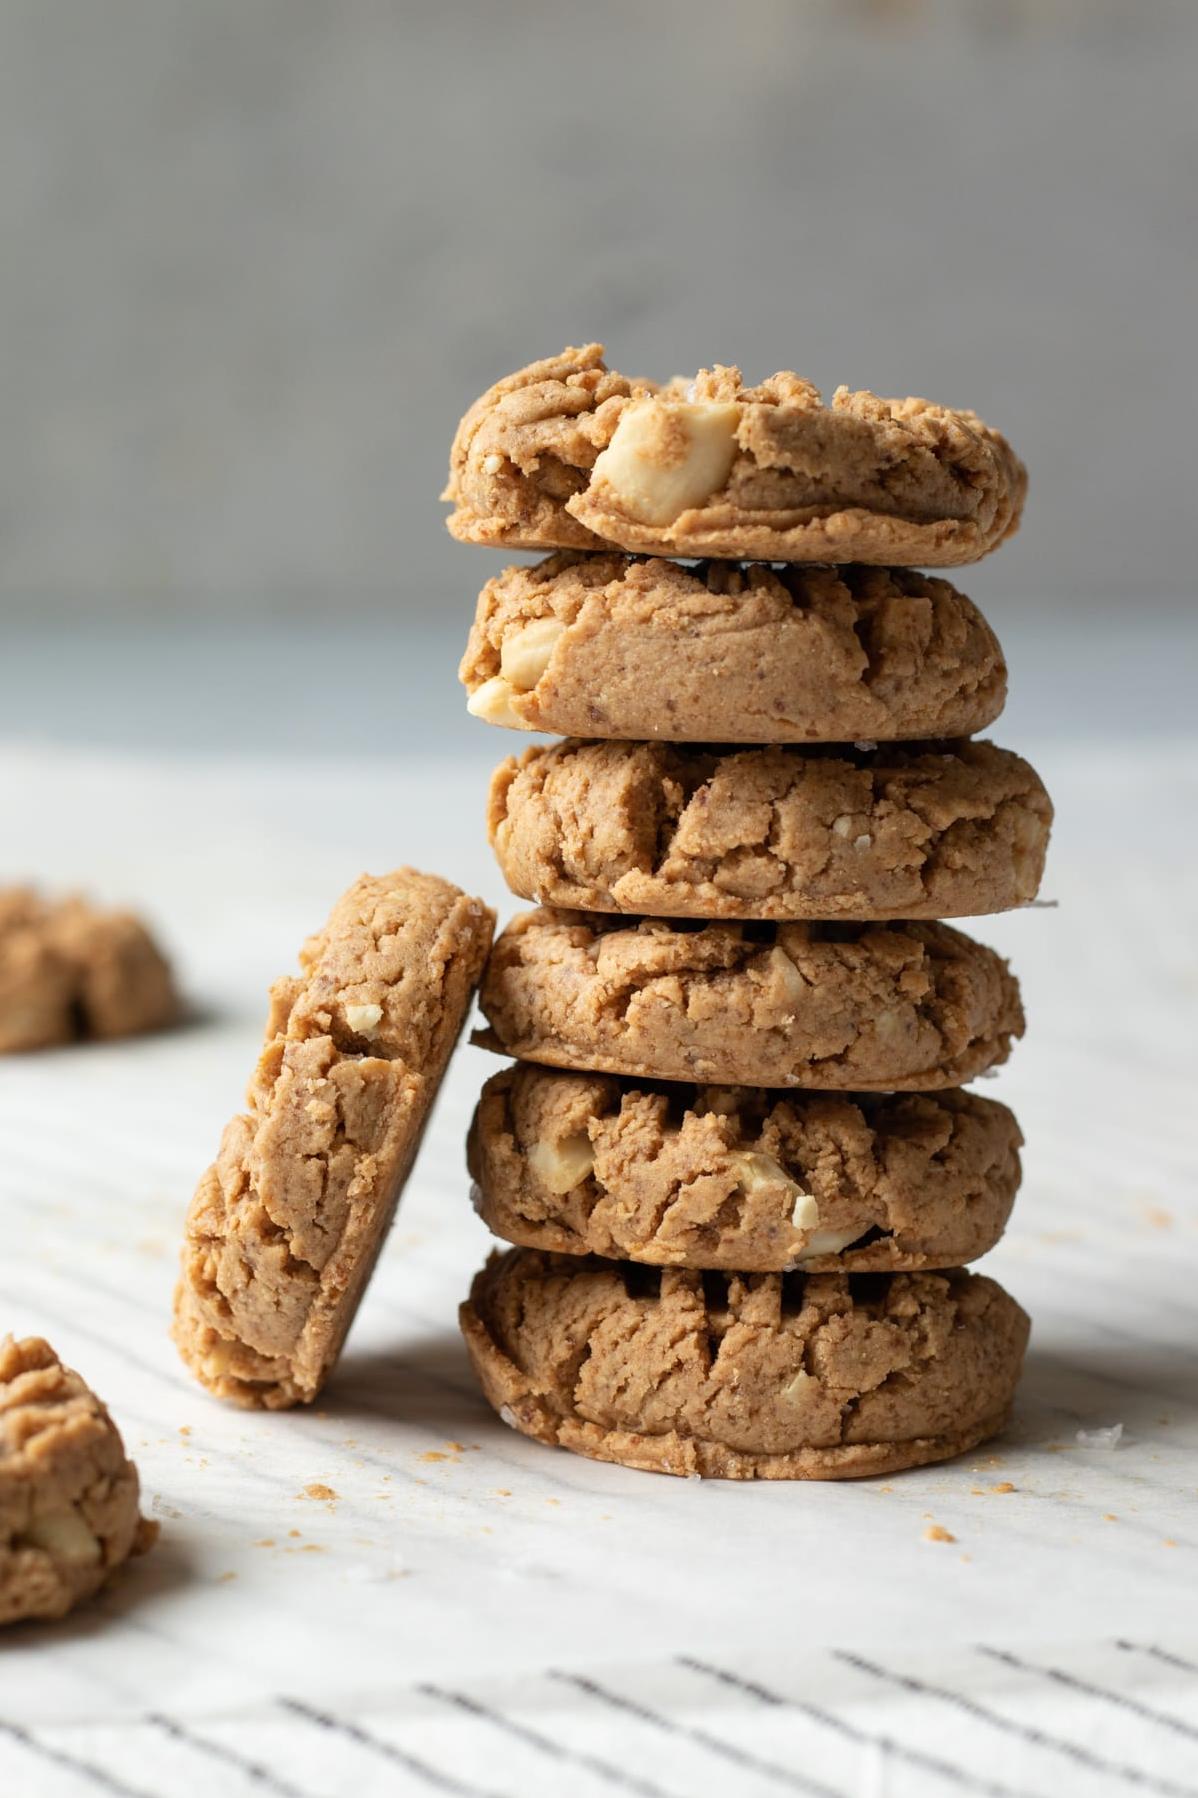  These cookies are the perfect guilt-free treat!